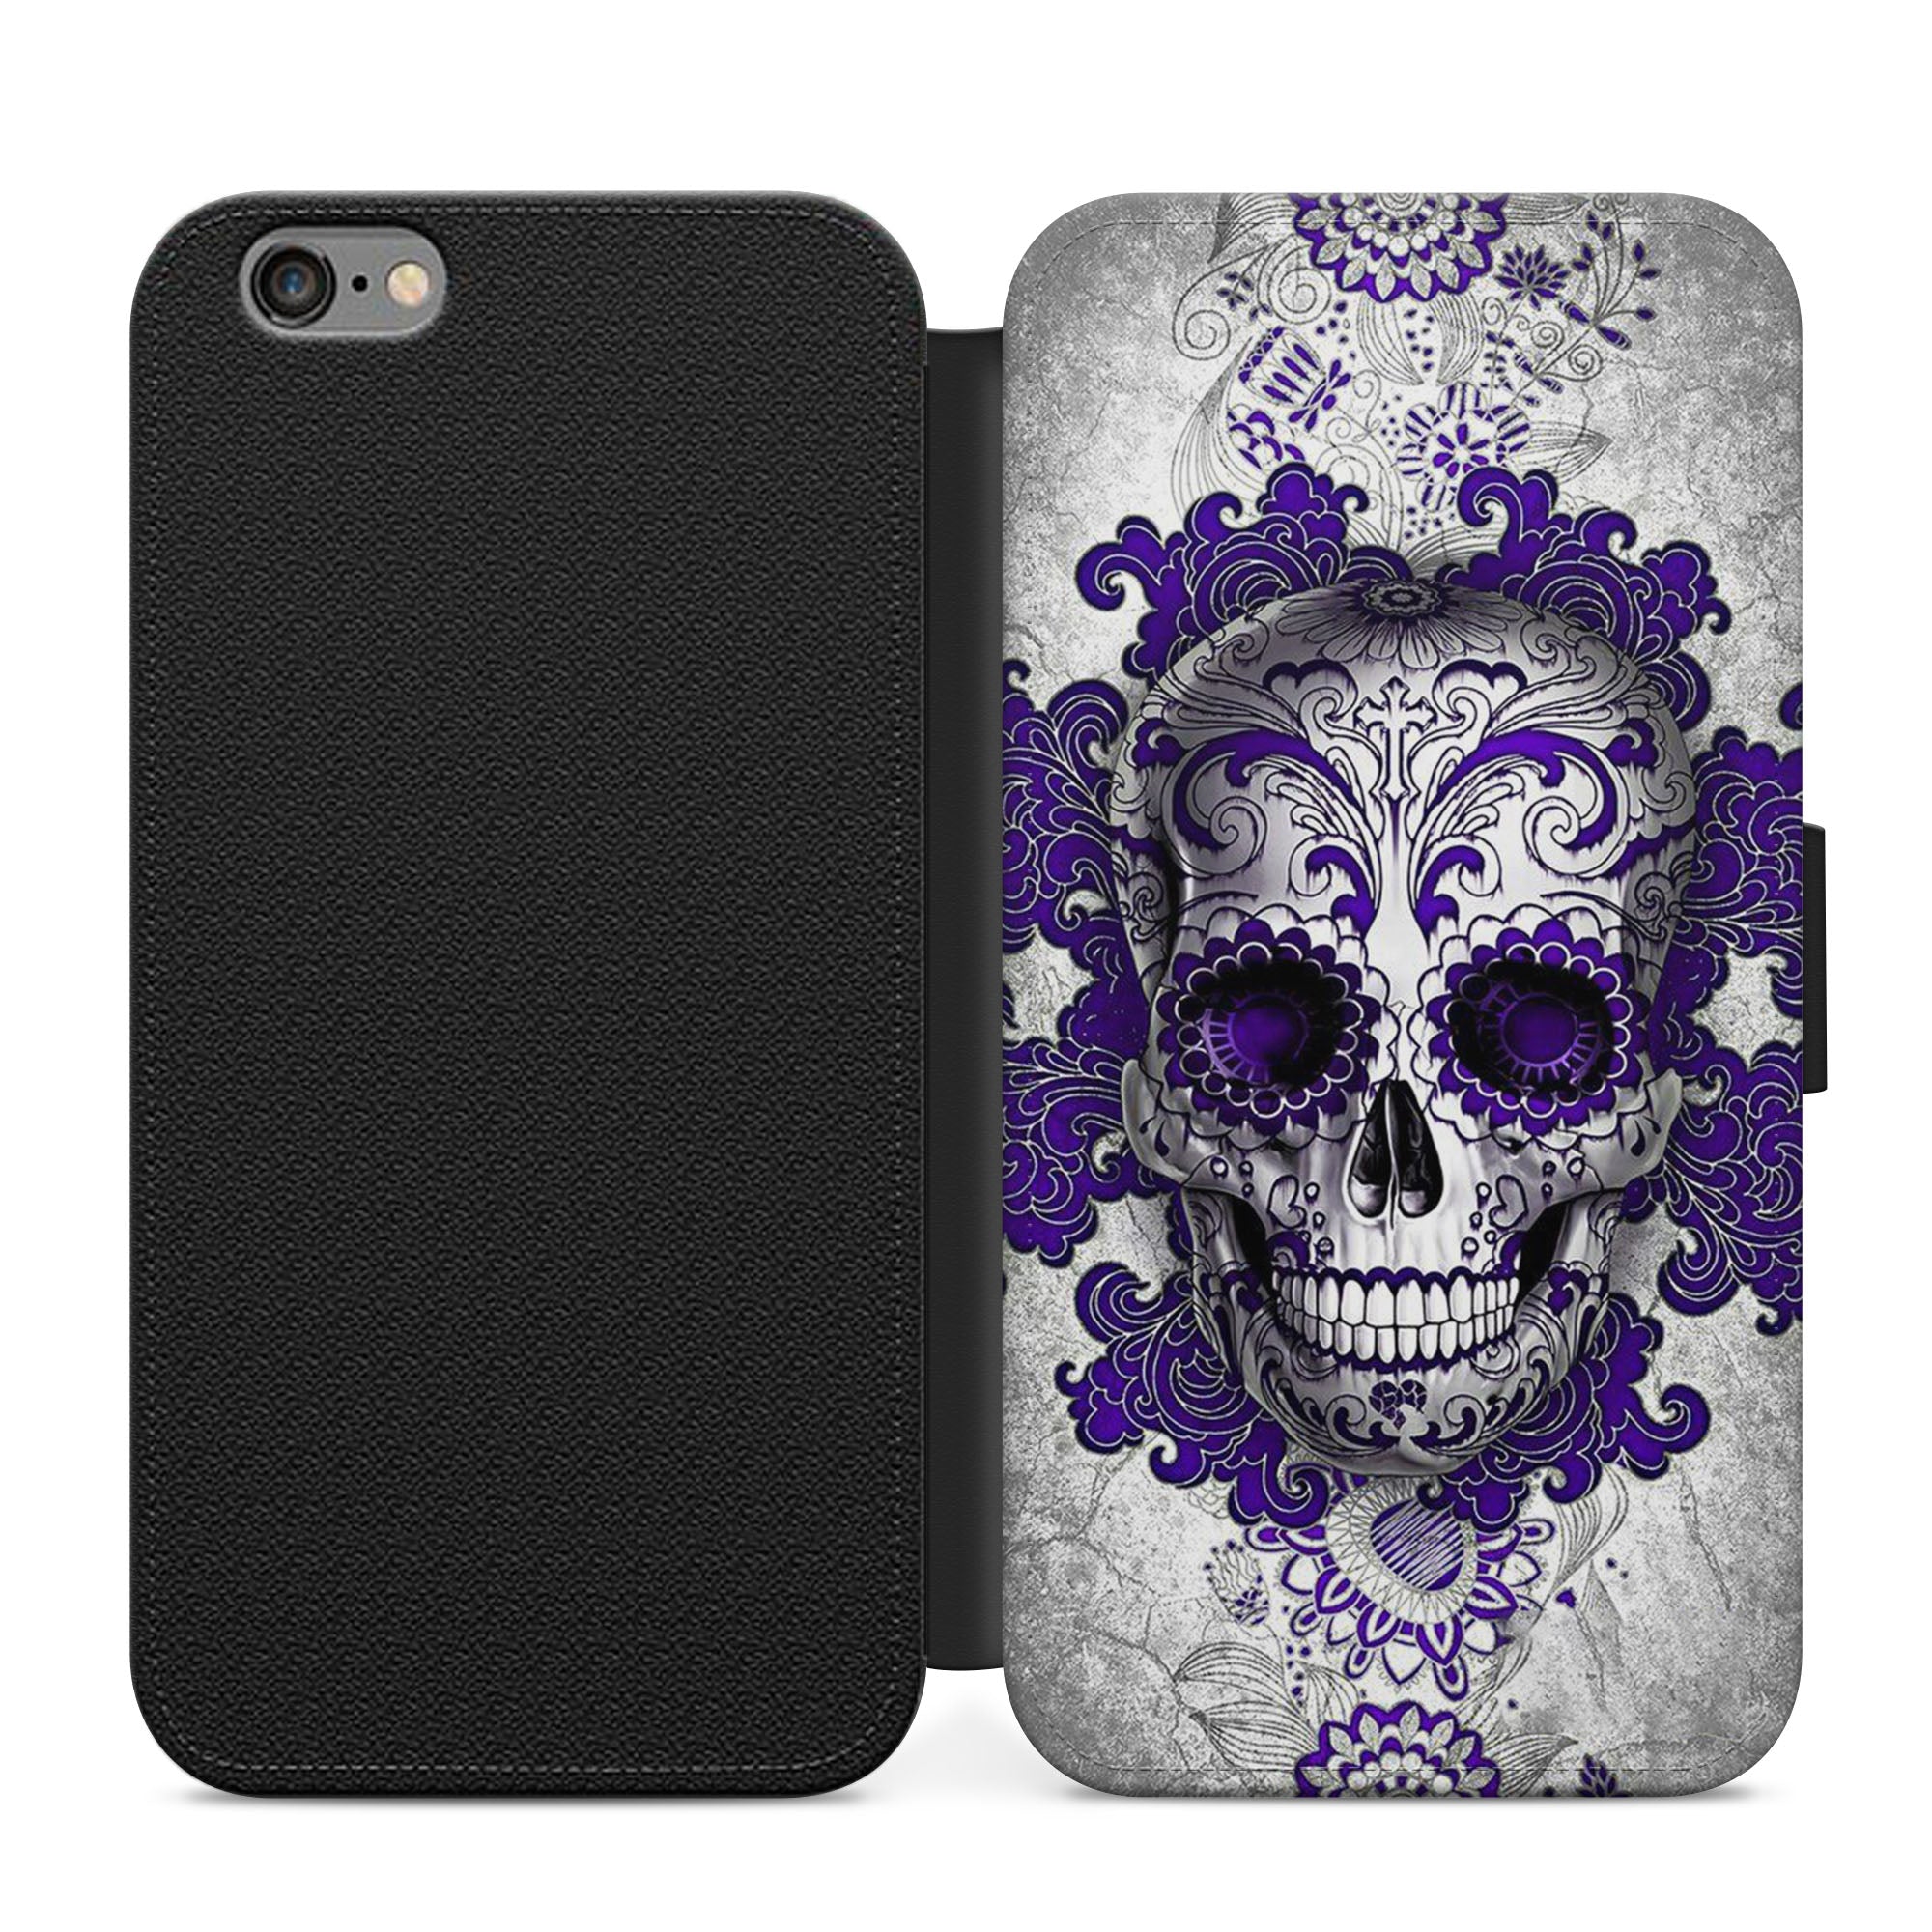 Skull Floral Faux Leather Flip Case Wallet for iPhone / Samsung